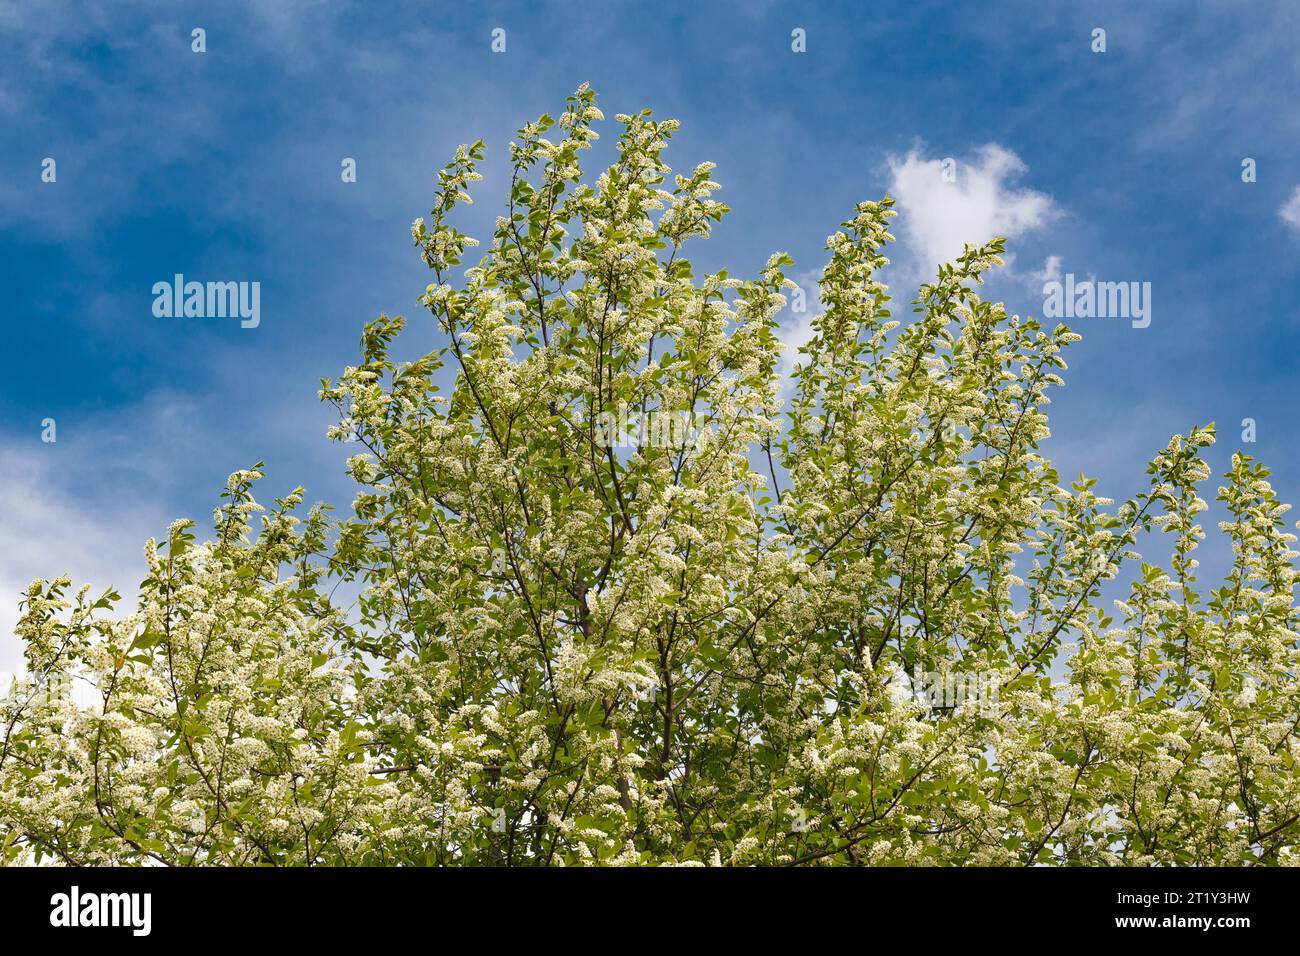 Blooming bird cherry against a bright blue sky with white clouds Stock Photo